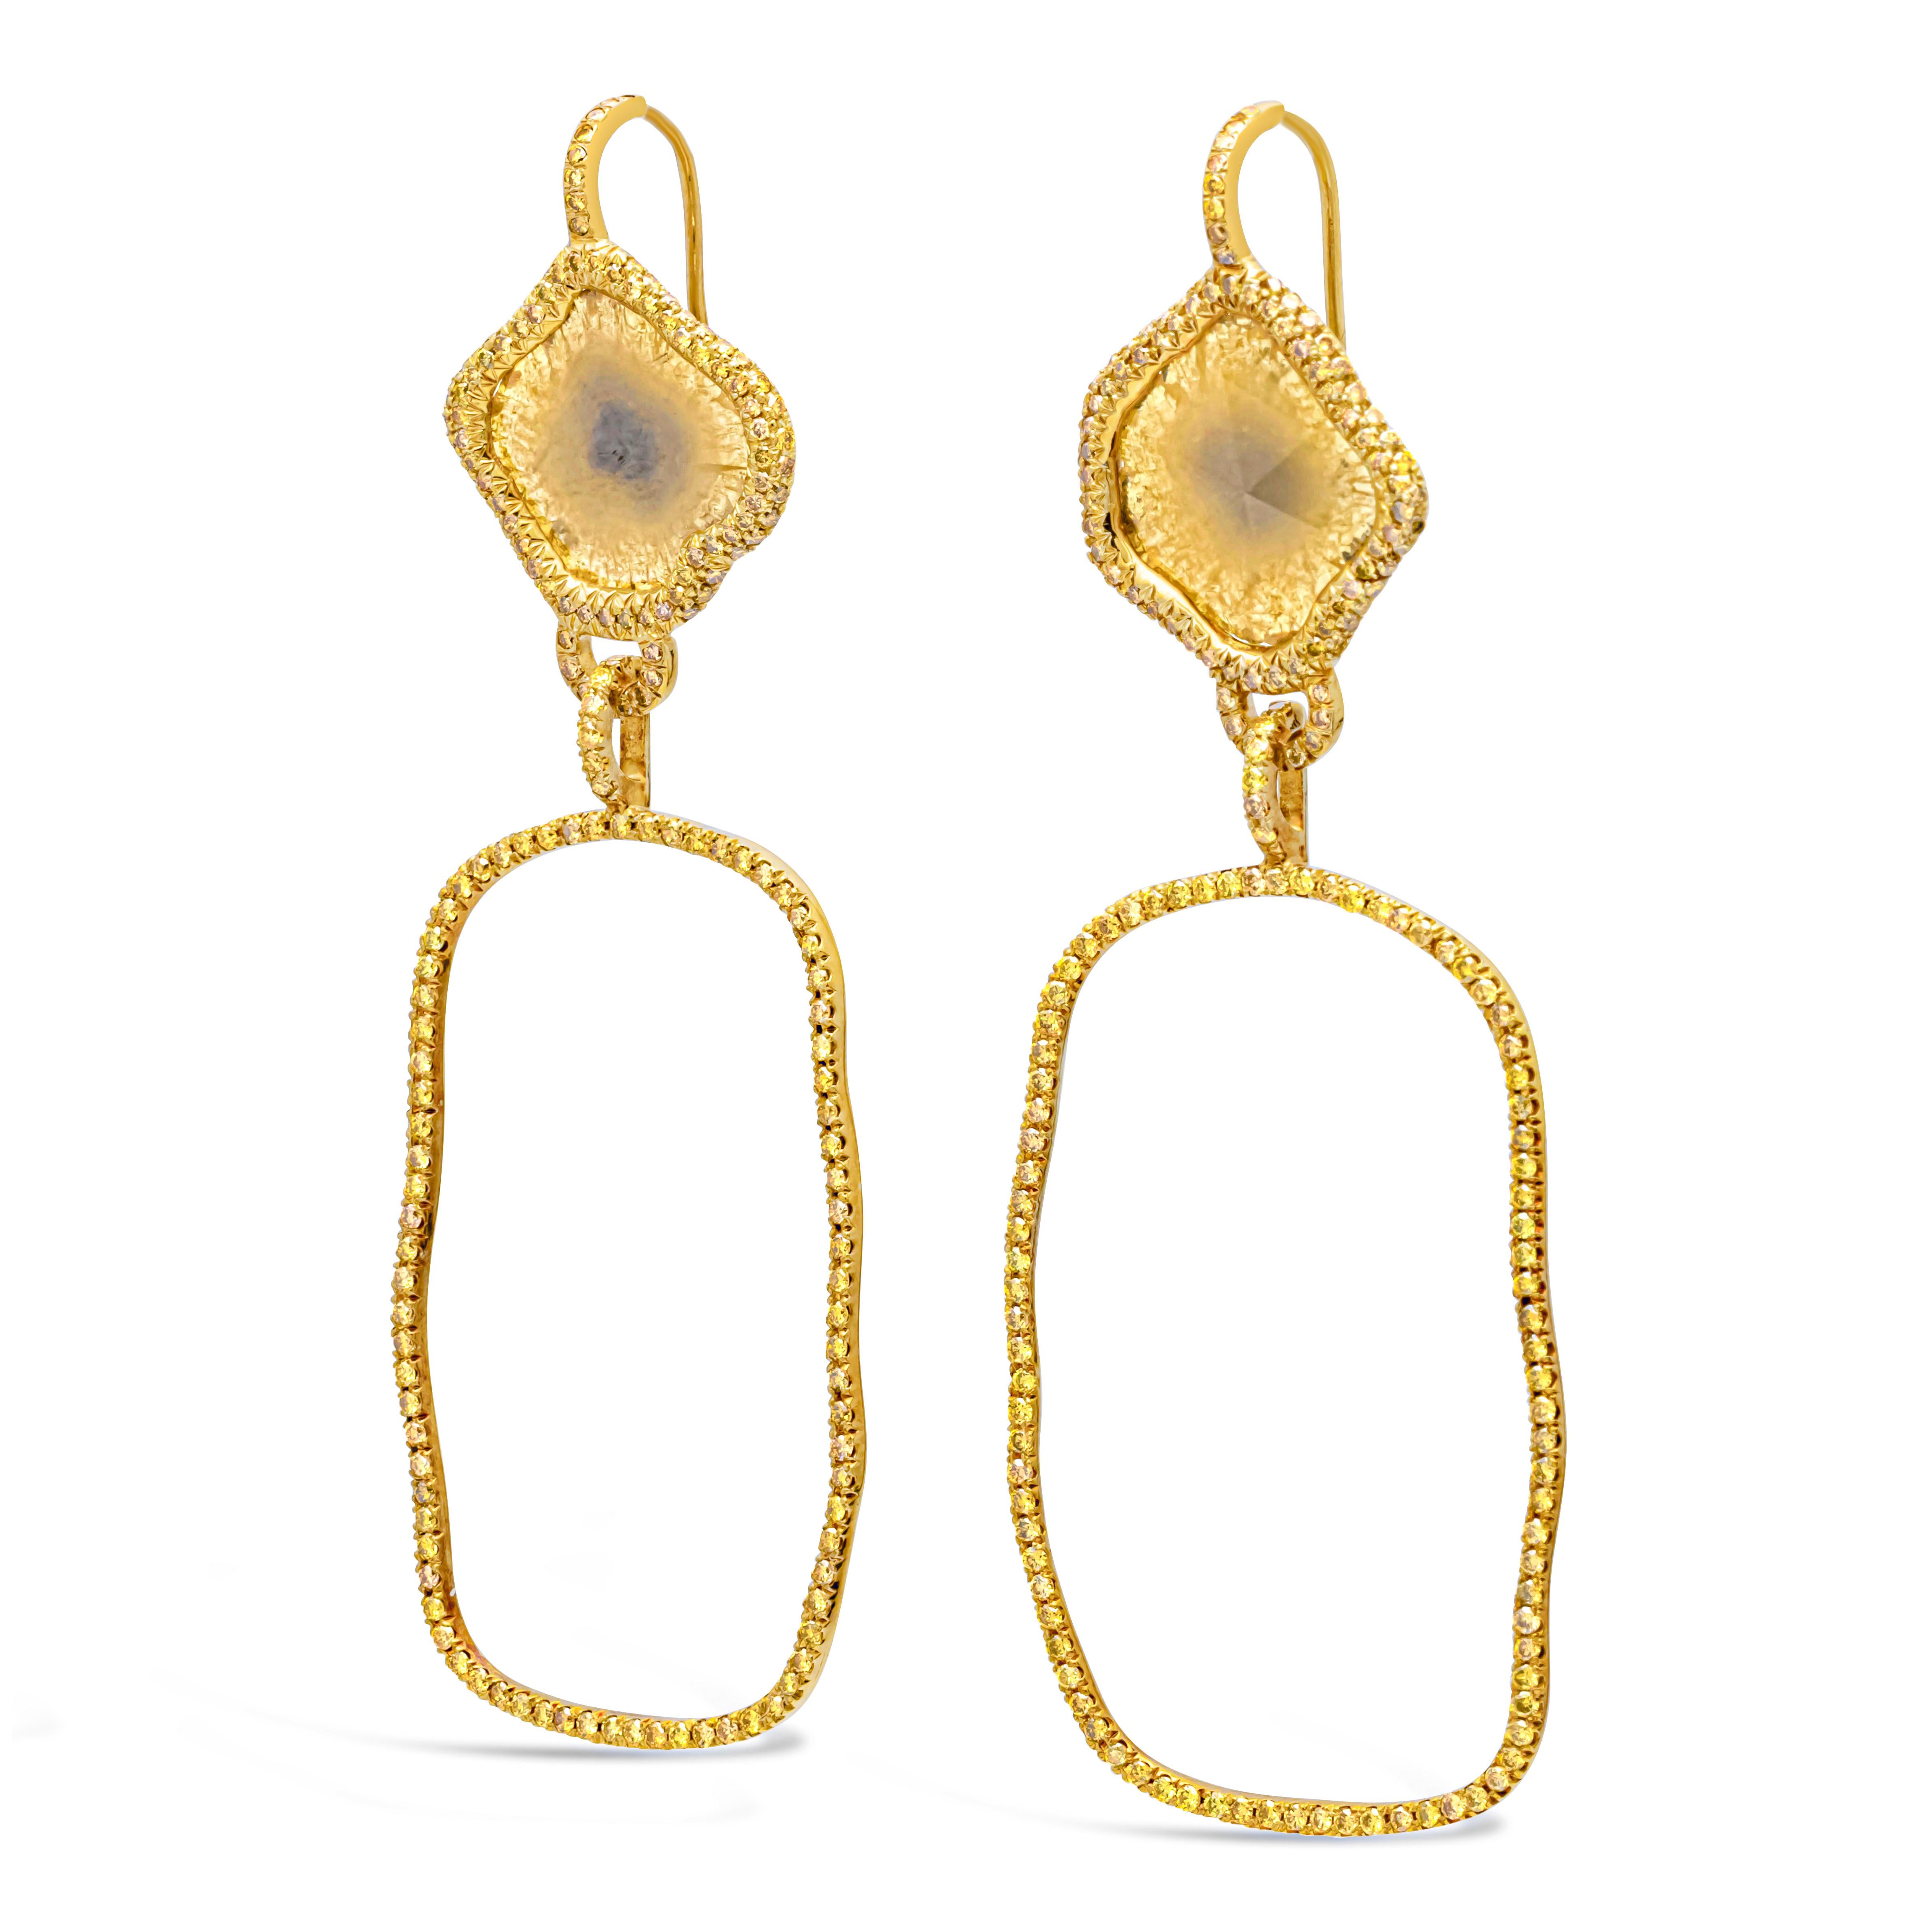 Showcasing a beautiful, special and intricately-designed pair of dangle earrings set with yellow brown diamond slices weighing 3.10 carats total and 376 brilliant round yellowish diamonds weighing 4.20 carats total, SI in clarity. Finely made in 18k